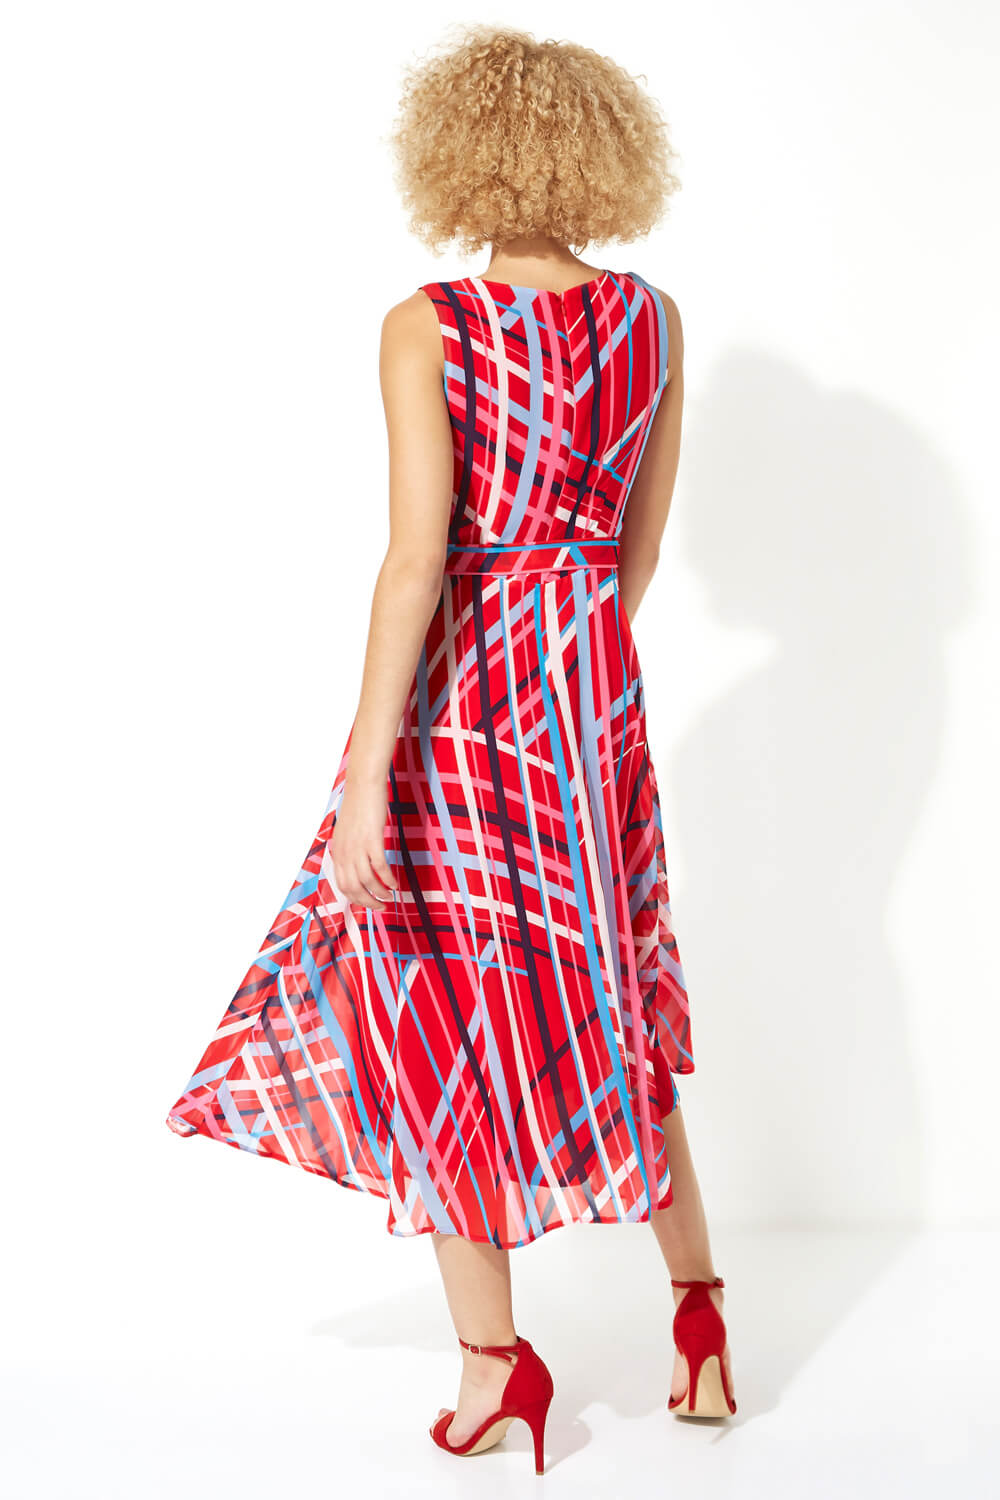 Red Stripe Print Fit and Flare Midi Dress, Image 2 of 5